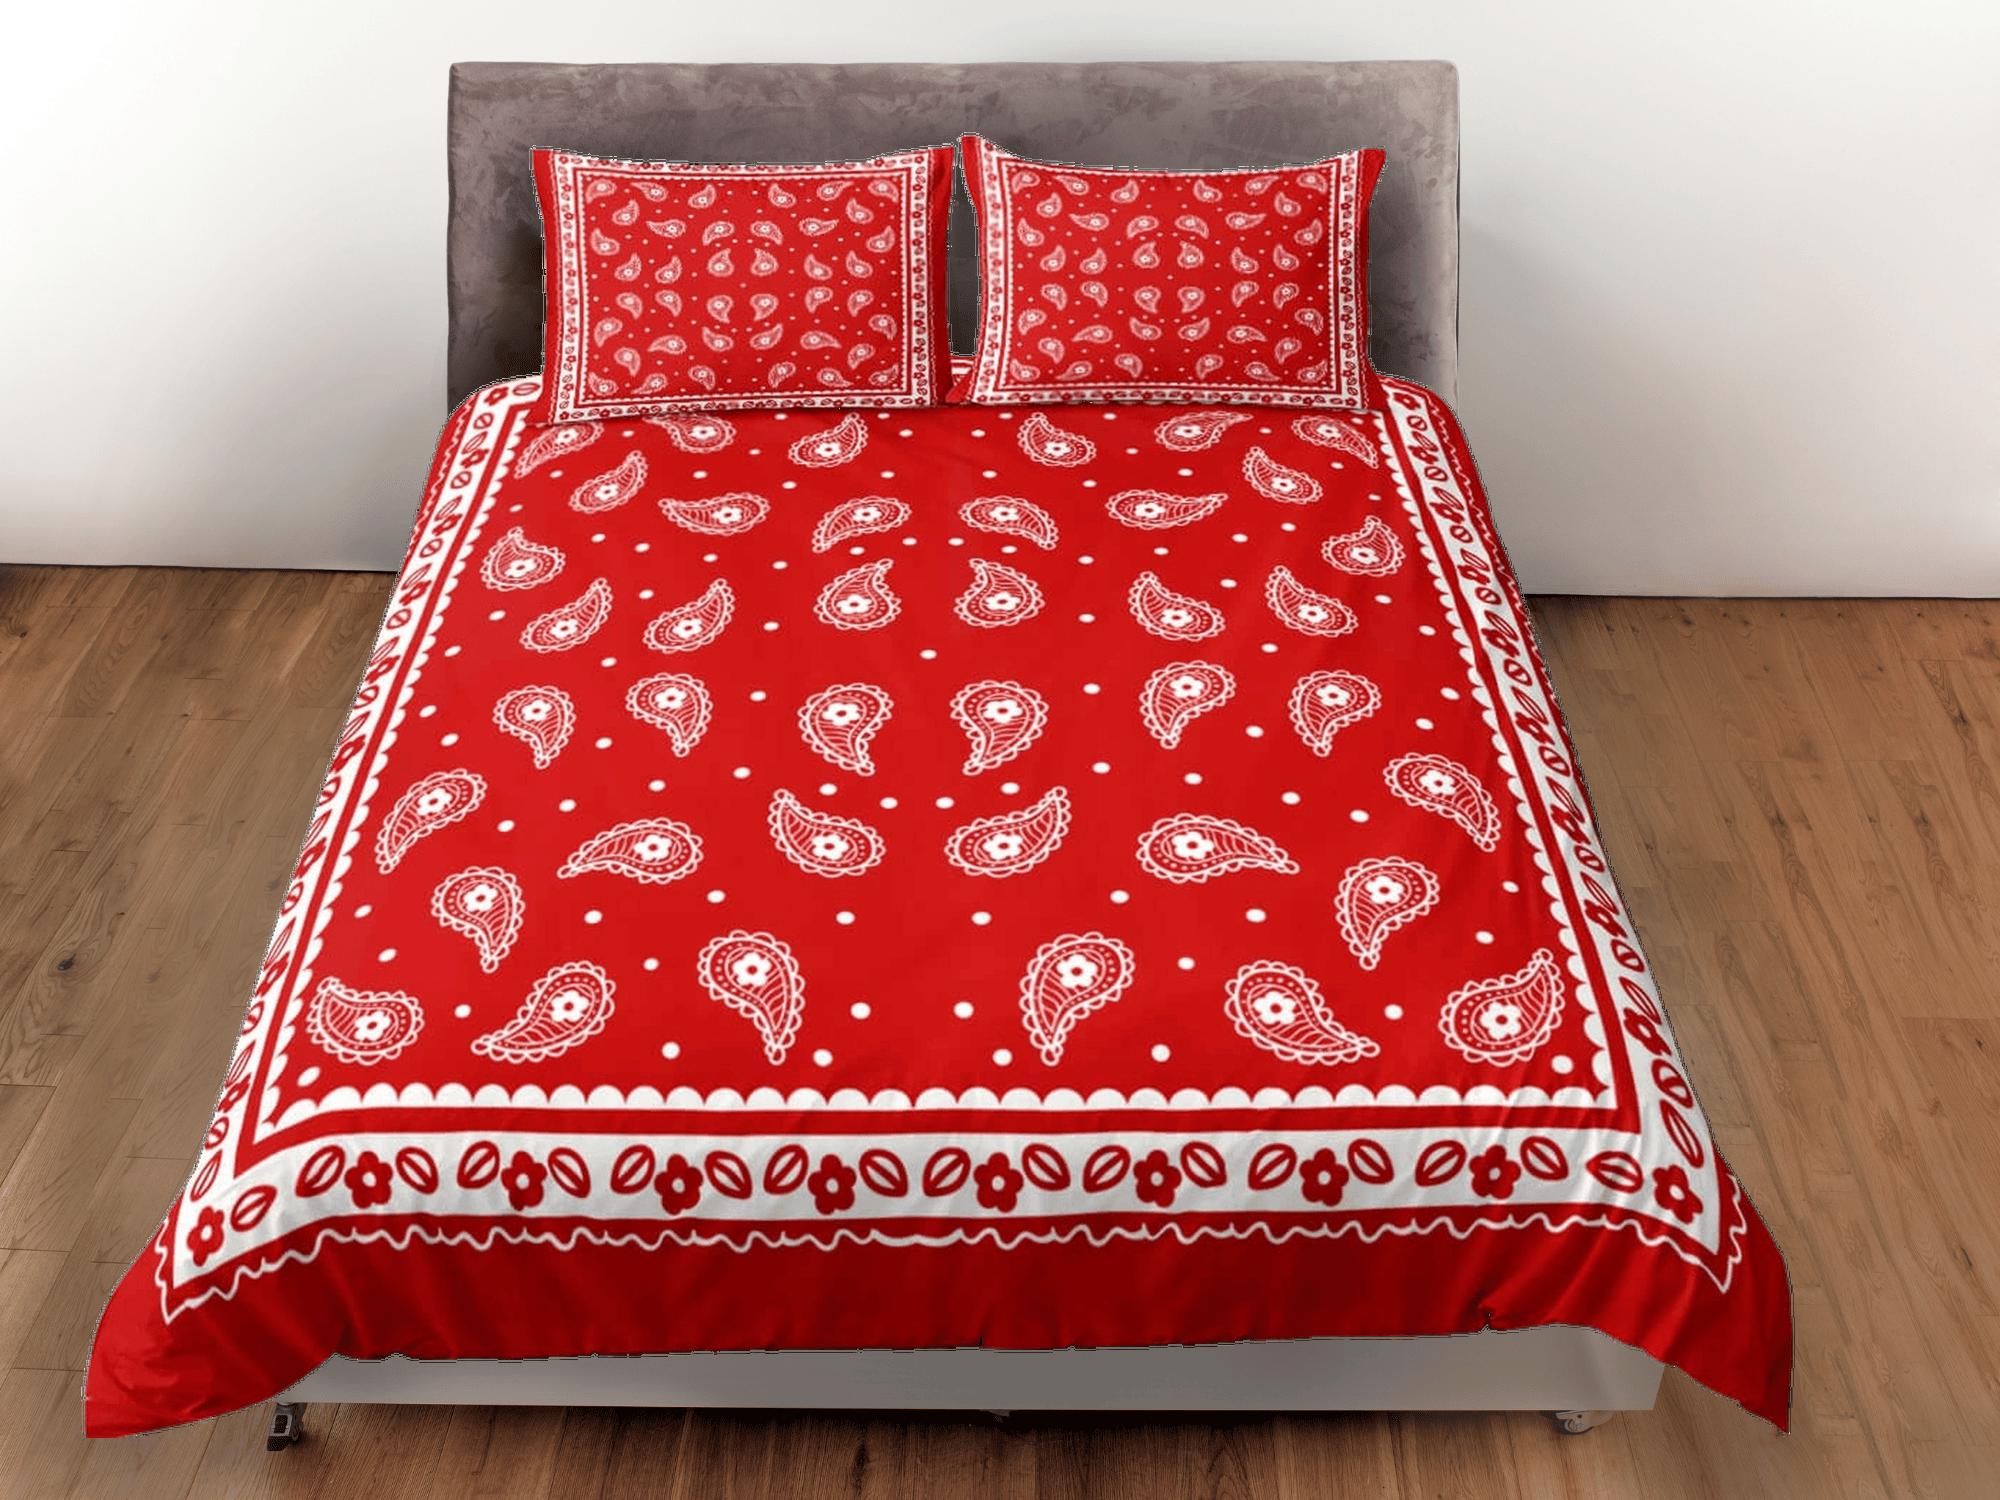 daintyduvet Red bandana paisley duvet cover set, aesthetic room decor bedding set full, king, queen size, abstract boho bedspread, luxury bed cover